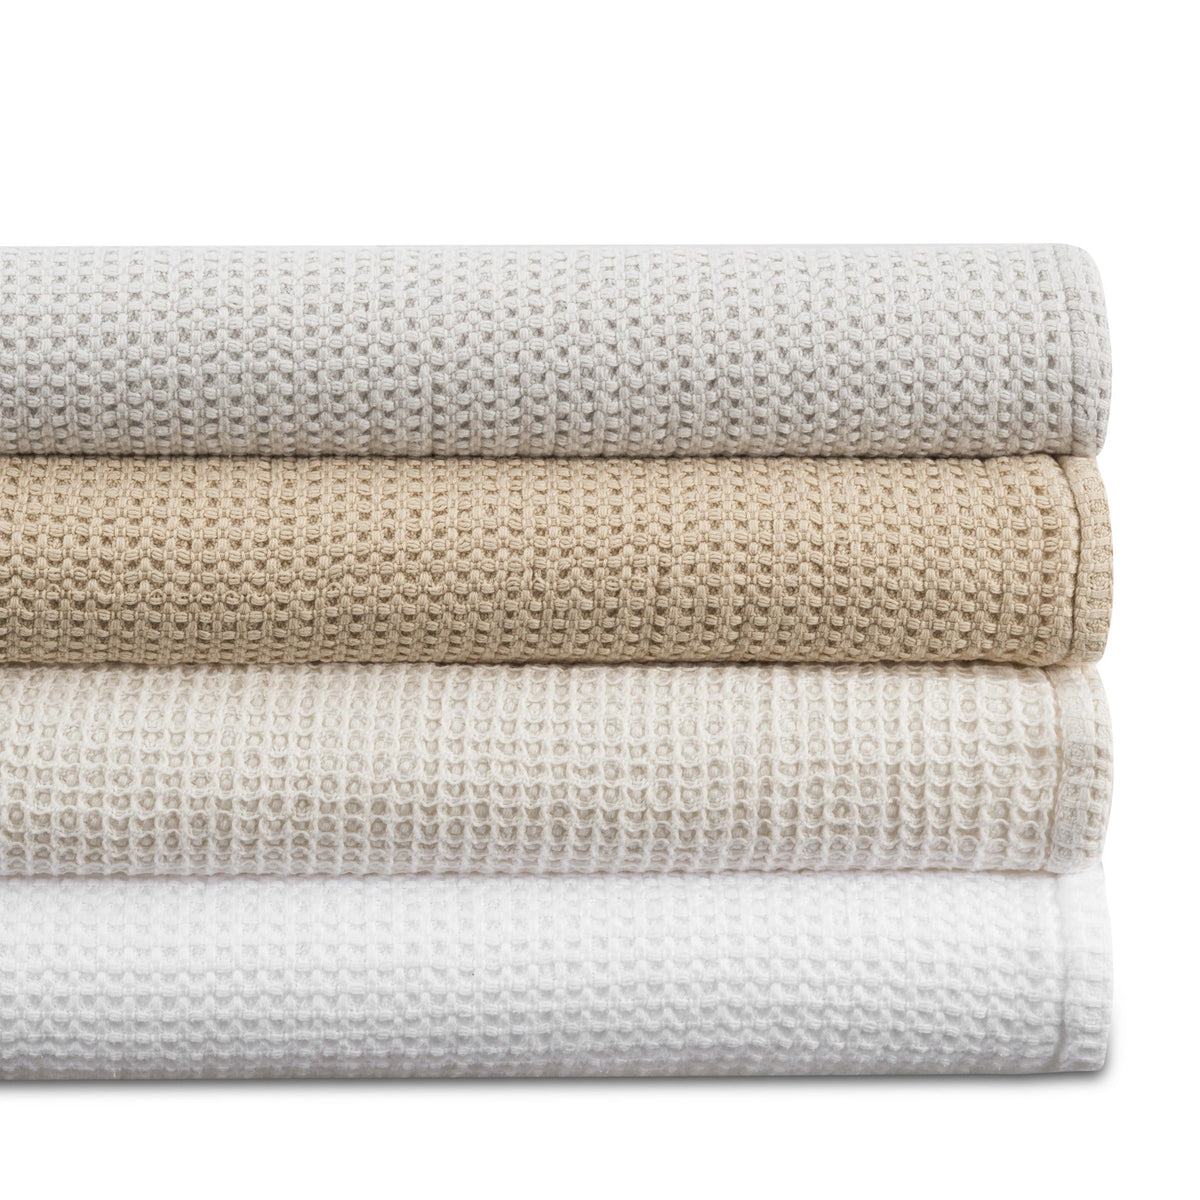 Stack of Matouk Chatham Blankets in Different Colors